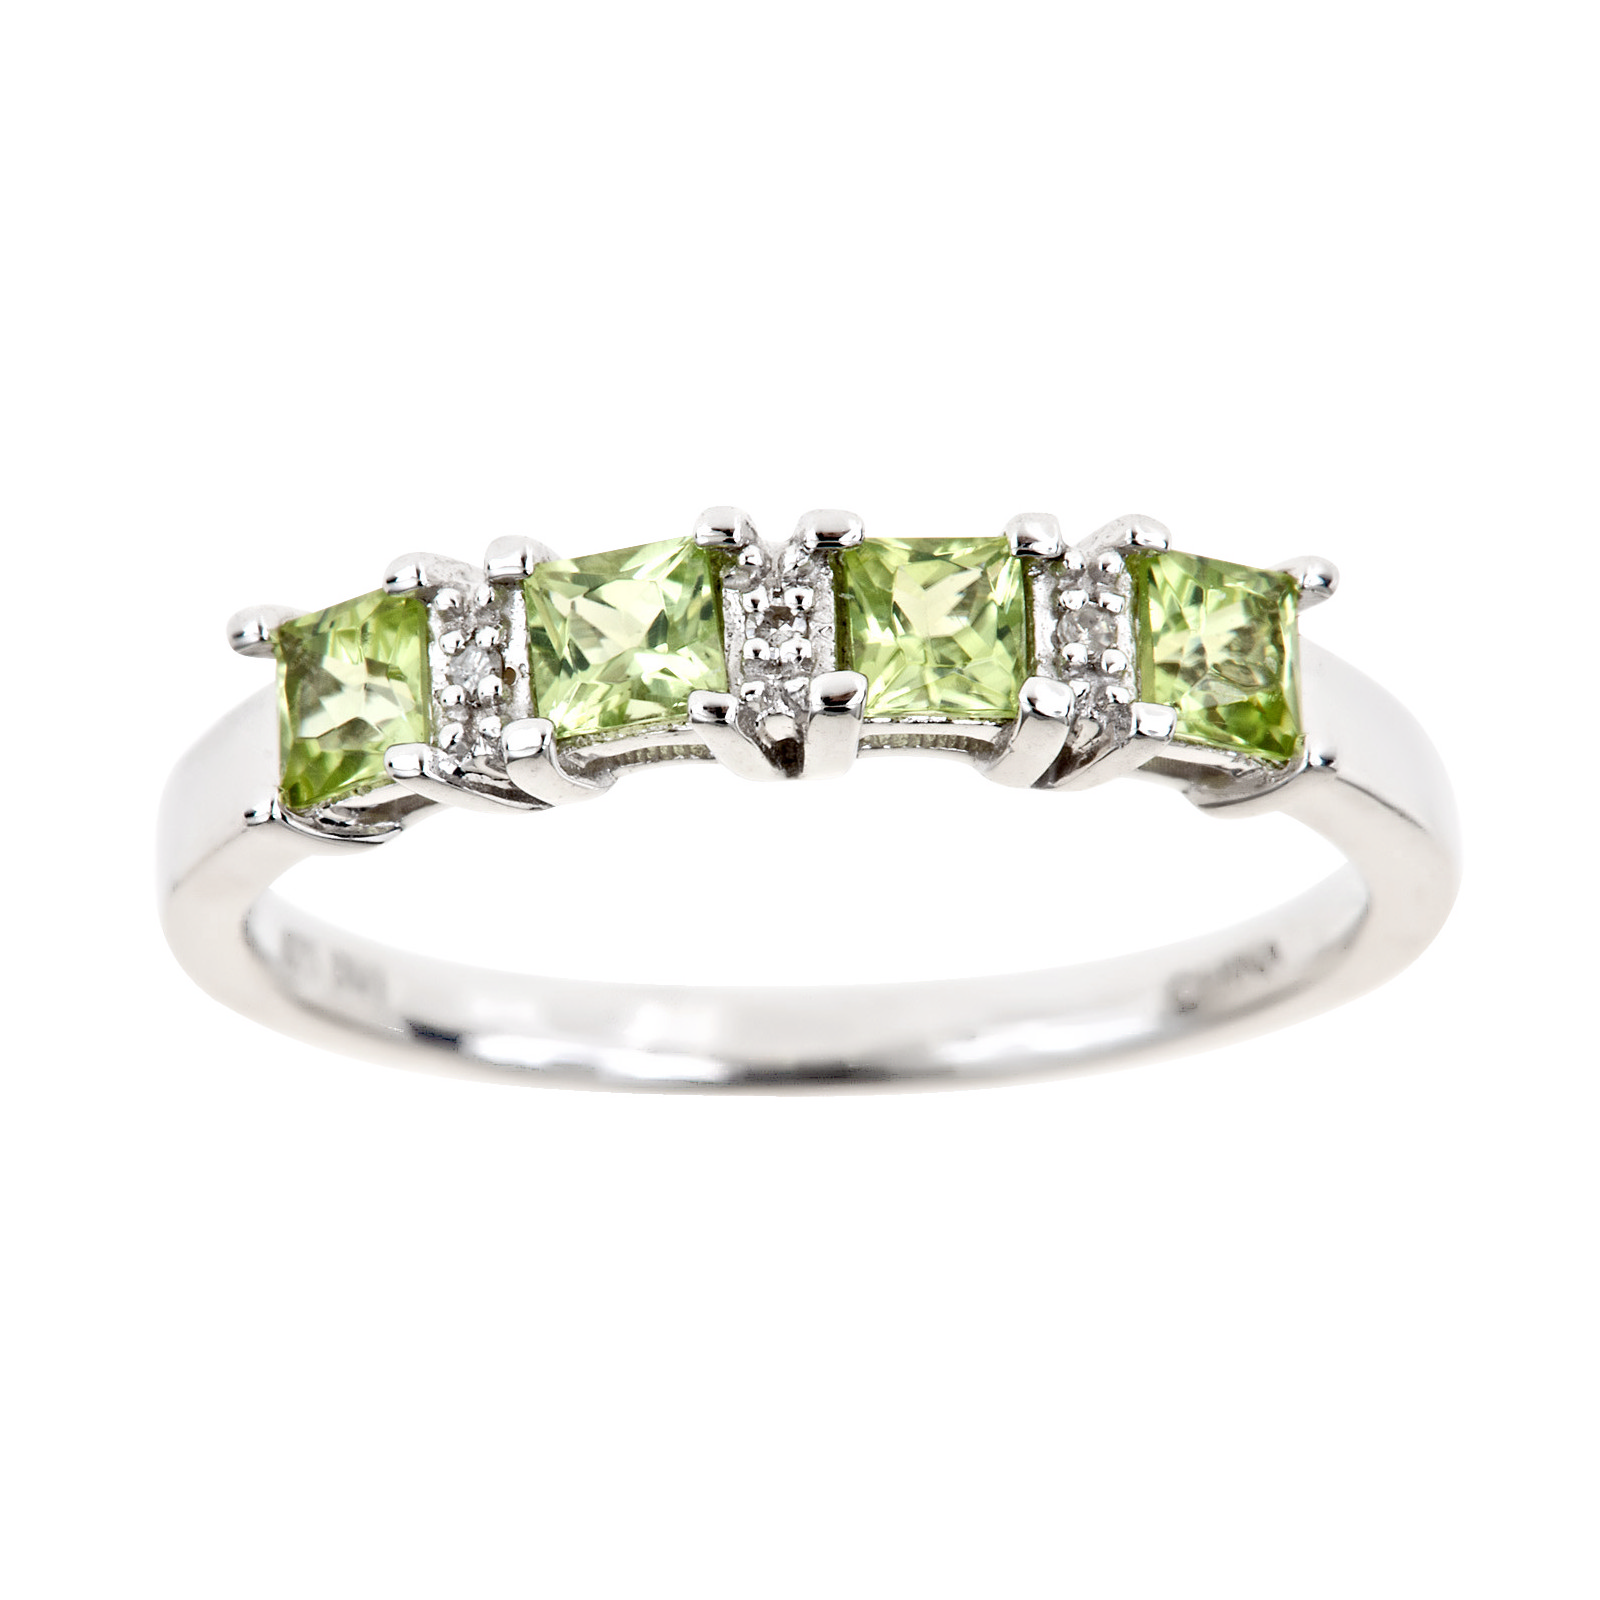 Ladies Sterling Silver 4 Stone Peridot and Diamond Accent Ring